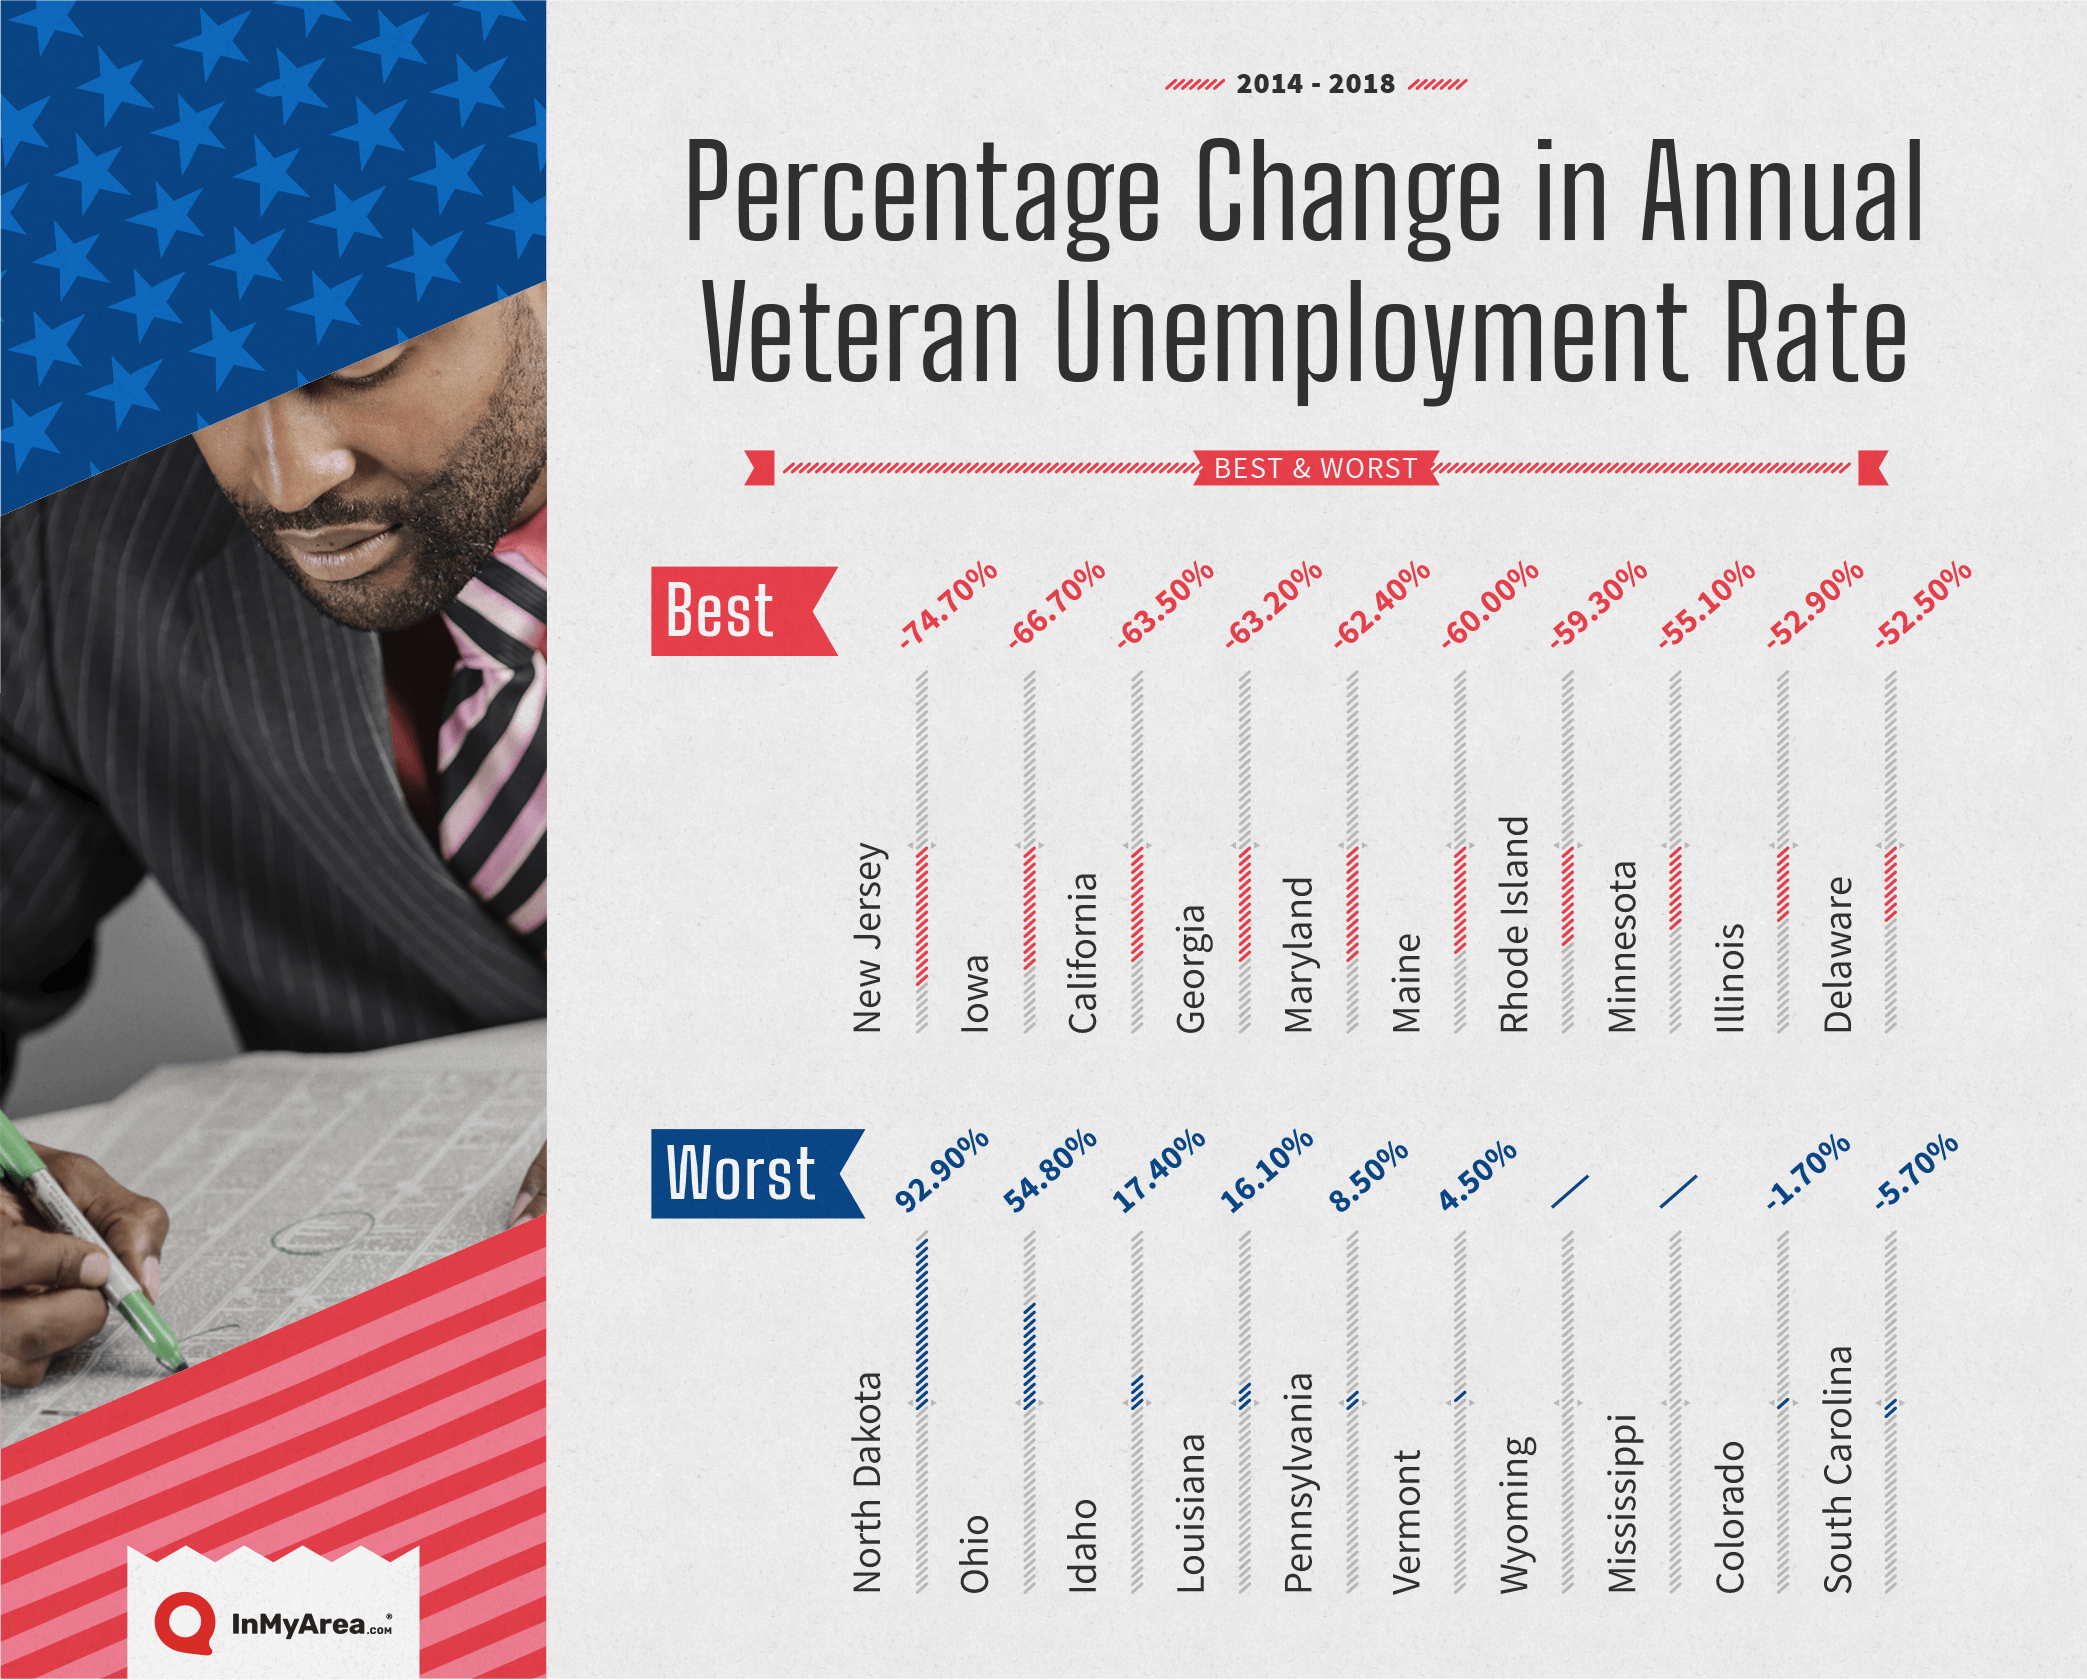 graph showing percentage change in annual veteran unemployment rate